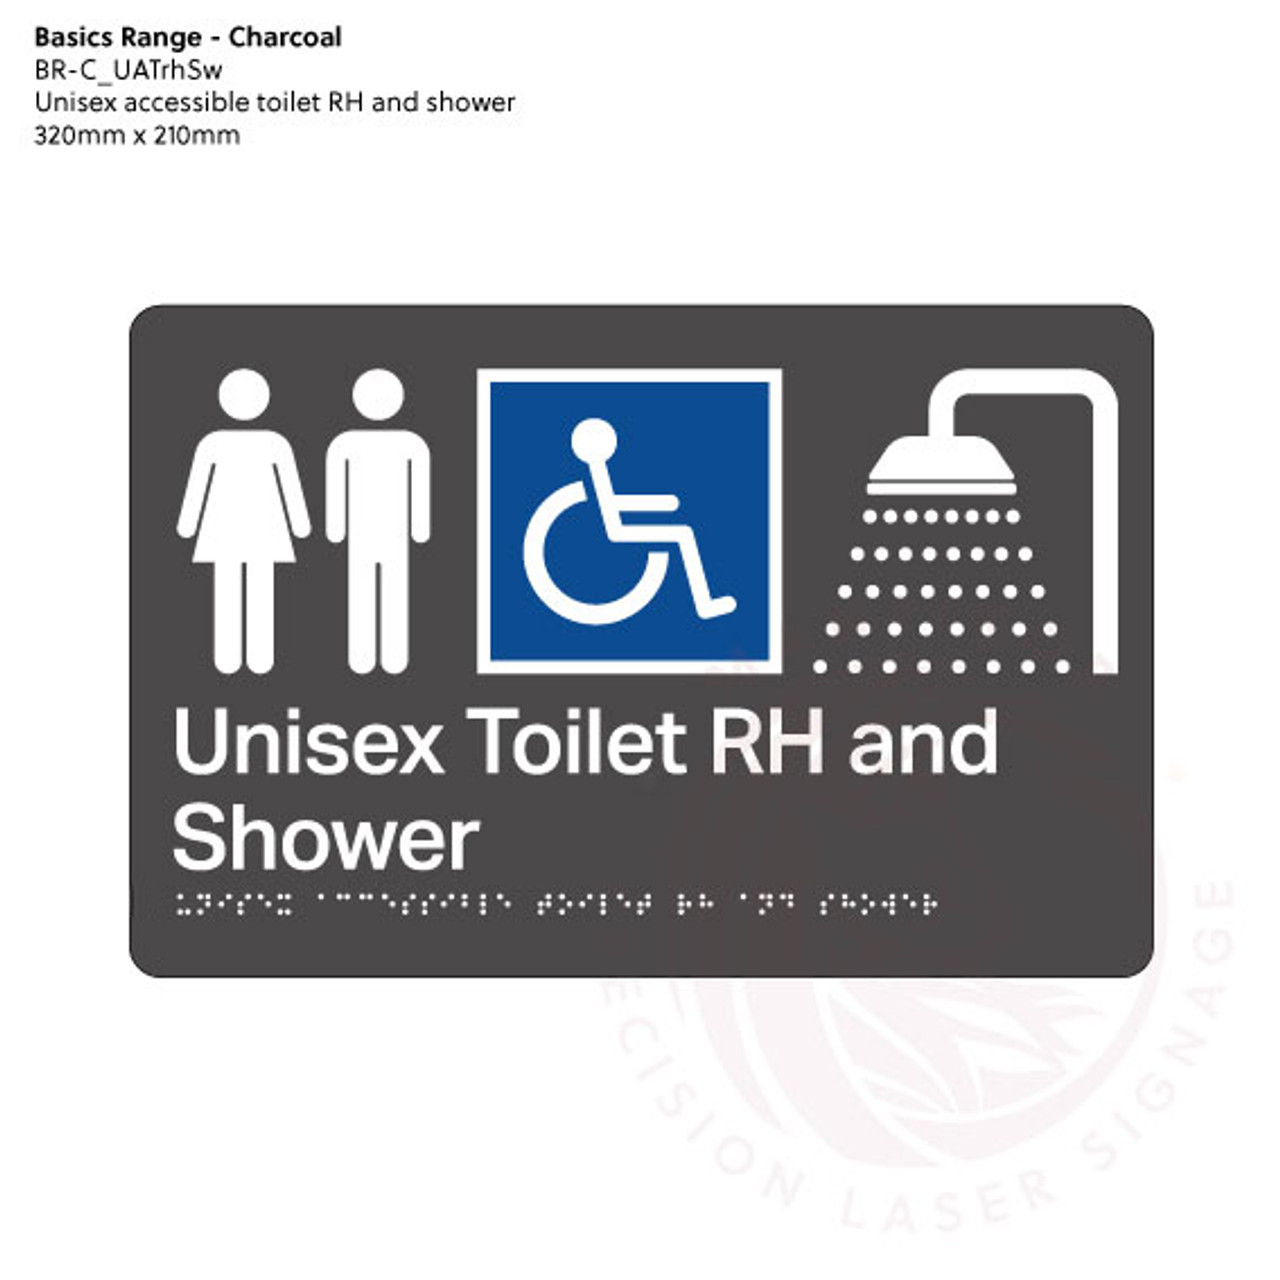 Basics Range - Charcoal Braille Signs - Unisex Accessible Toilet RH and Shower